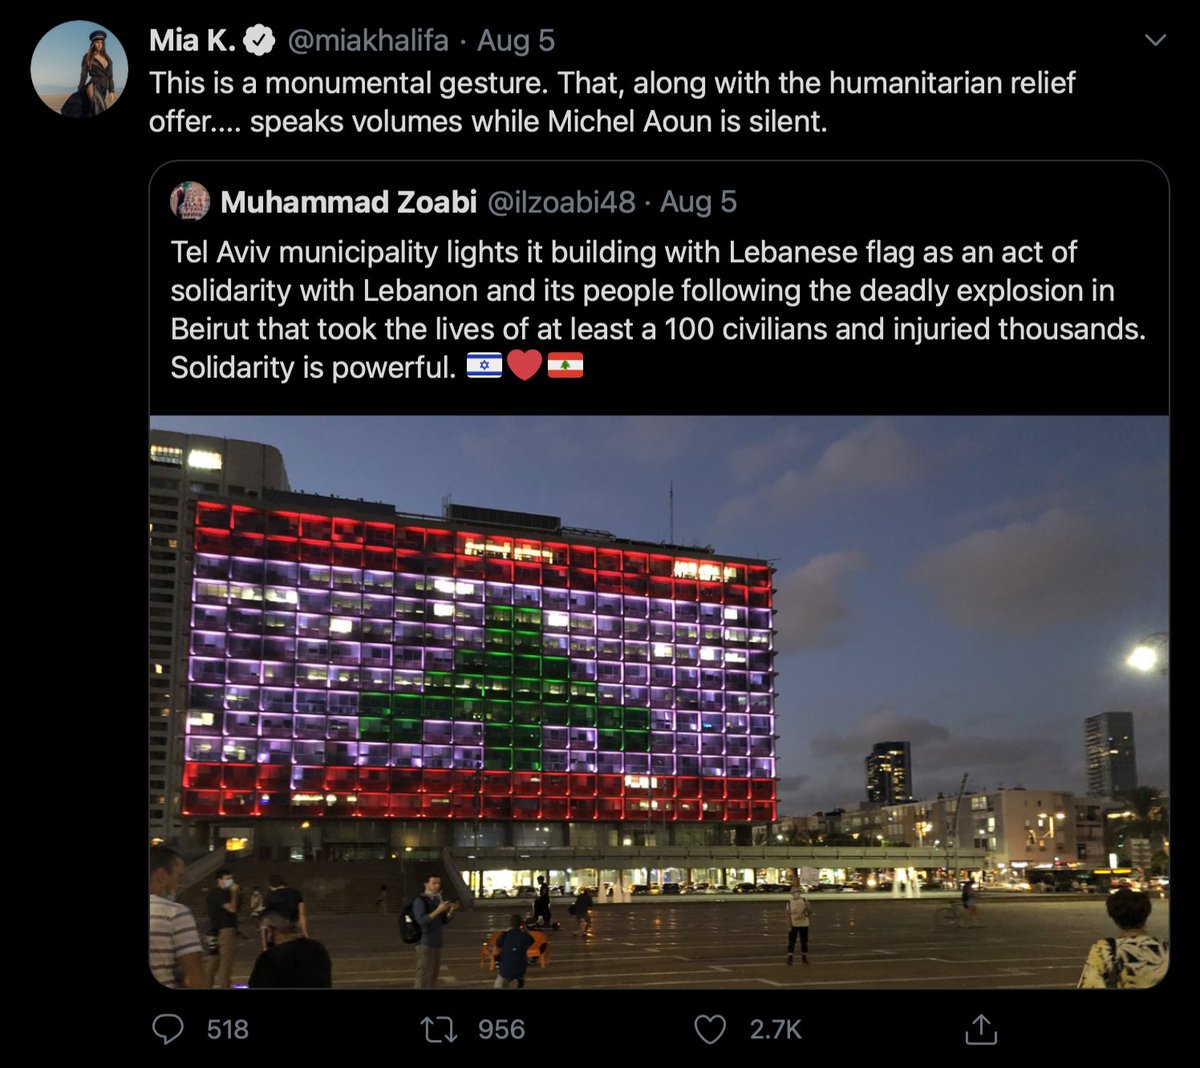 Initial hours after the blast at Beirut port (marfa'a), Mia 1) blamed Hezbollah 2) retweeted Saudi state propaganda (Al-Arabiya) that blamed Hezbollah for the blast without evidence. Later, she 3) cheered Macron's intervention 4) celebrated Israel's PR gestures as "monumental".